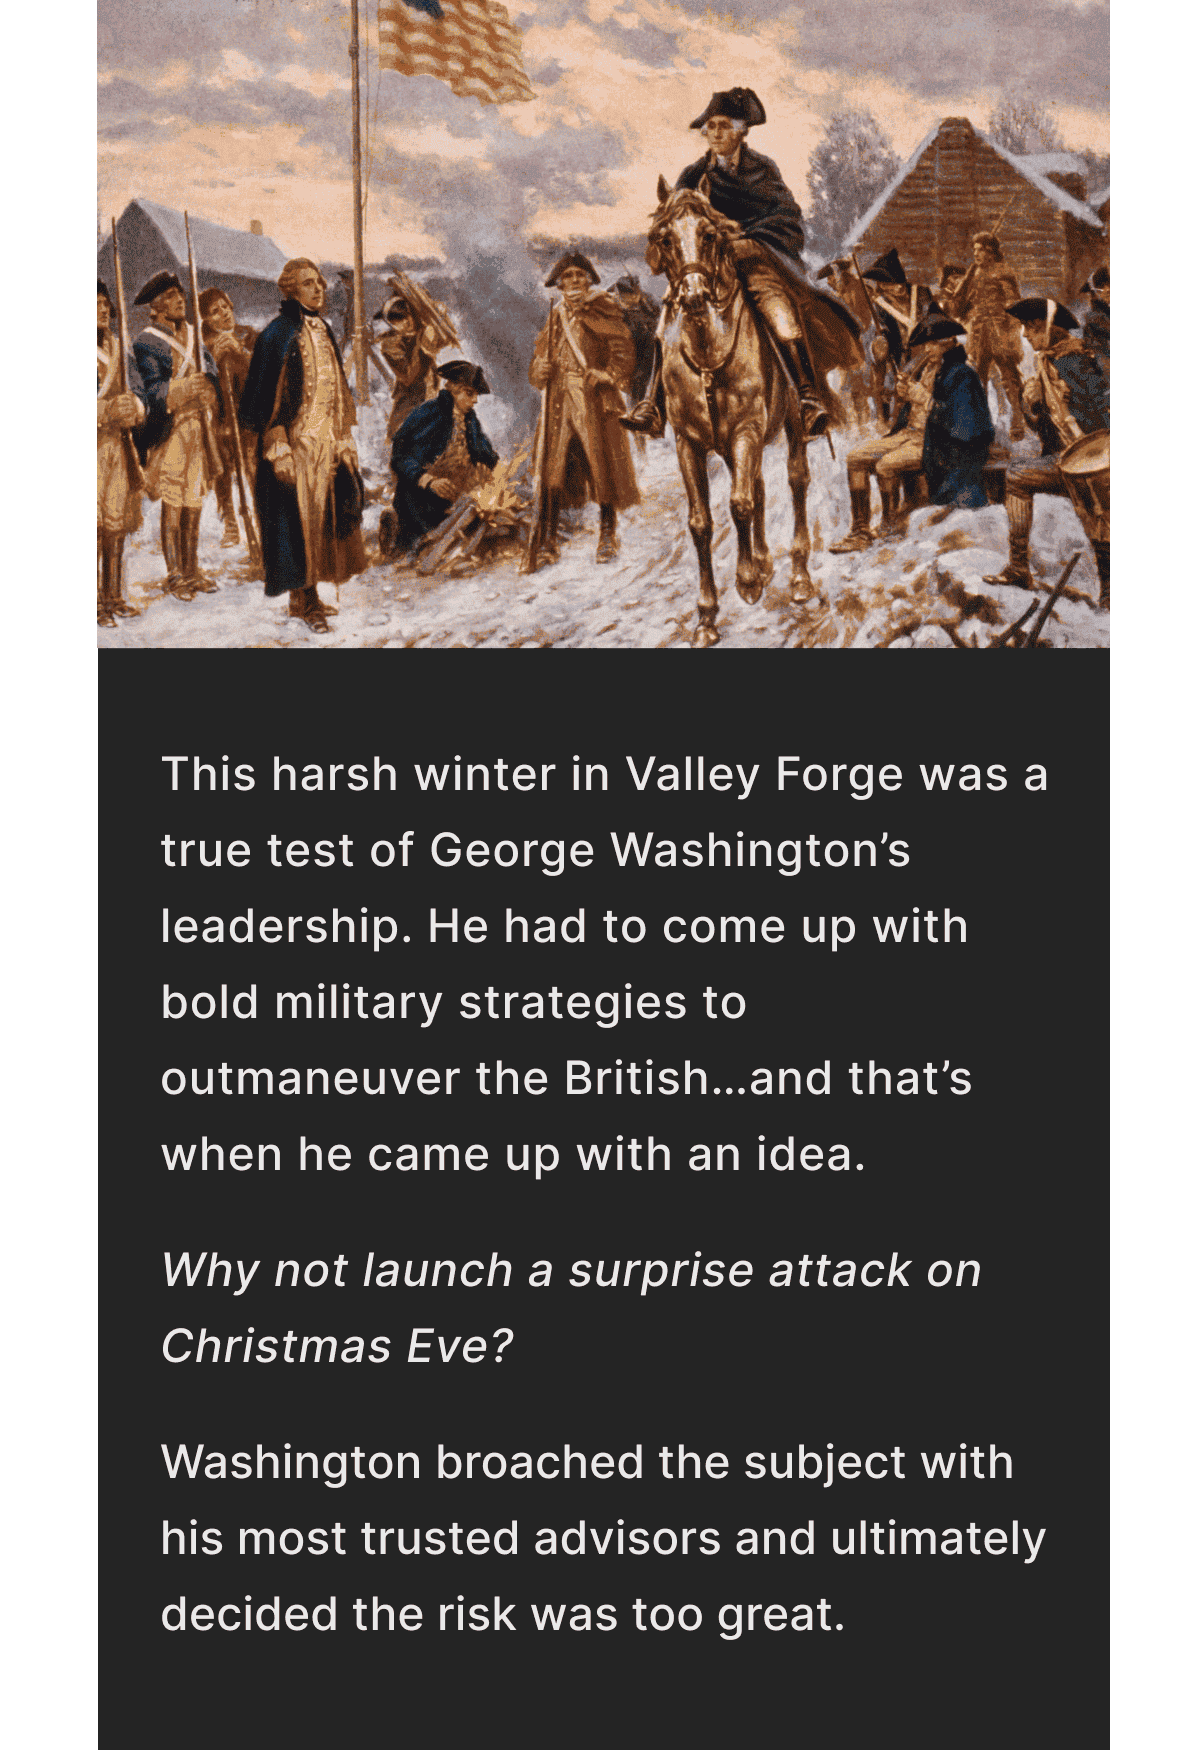 This harsh winter in Valley Forge was a true test of George Washington’s leadership.